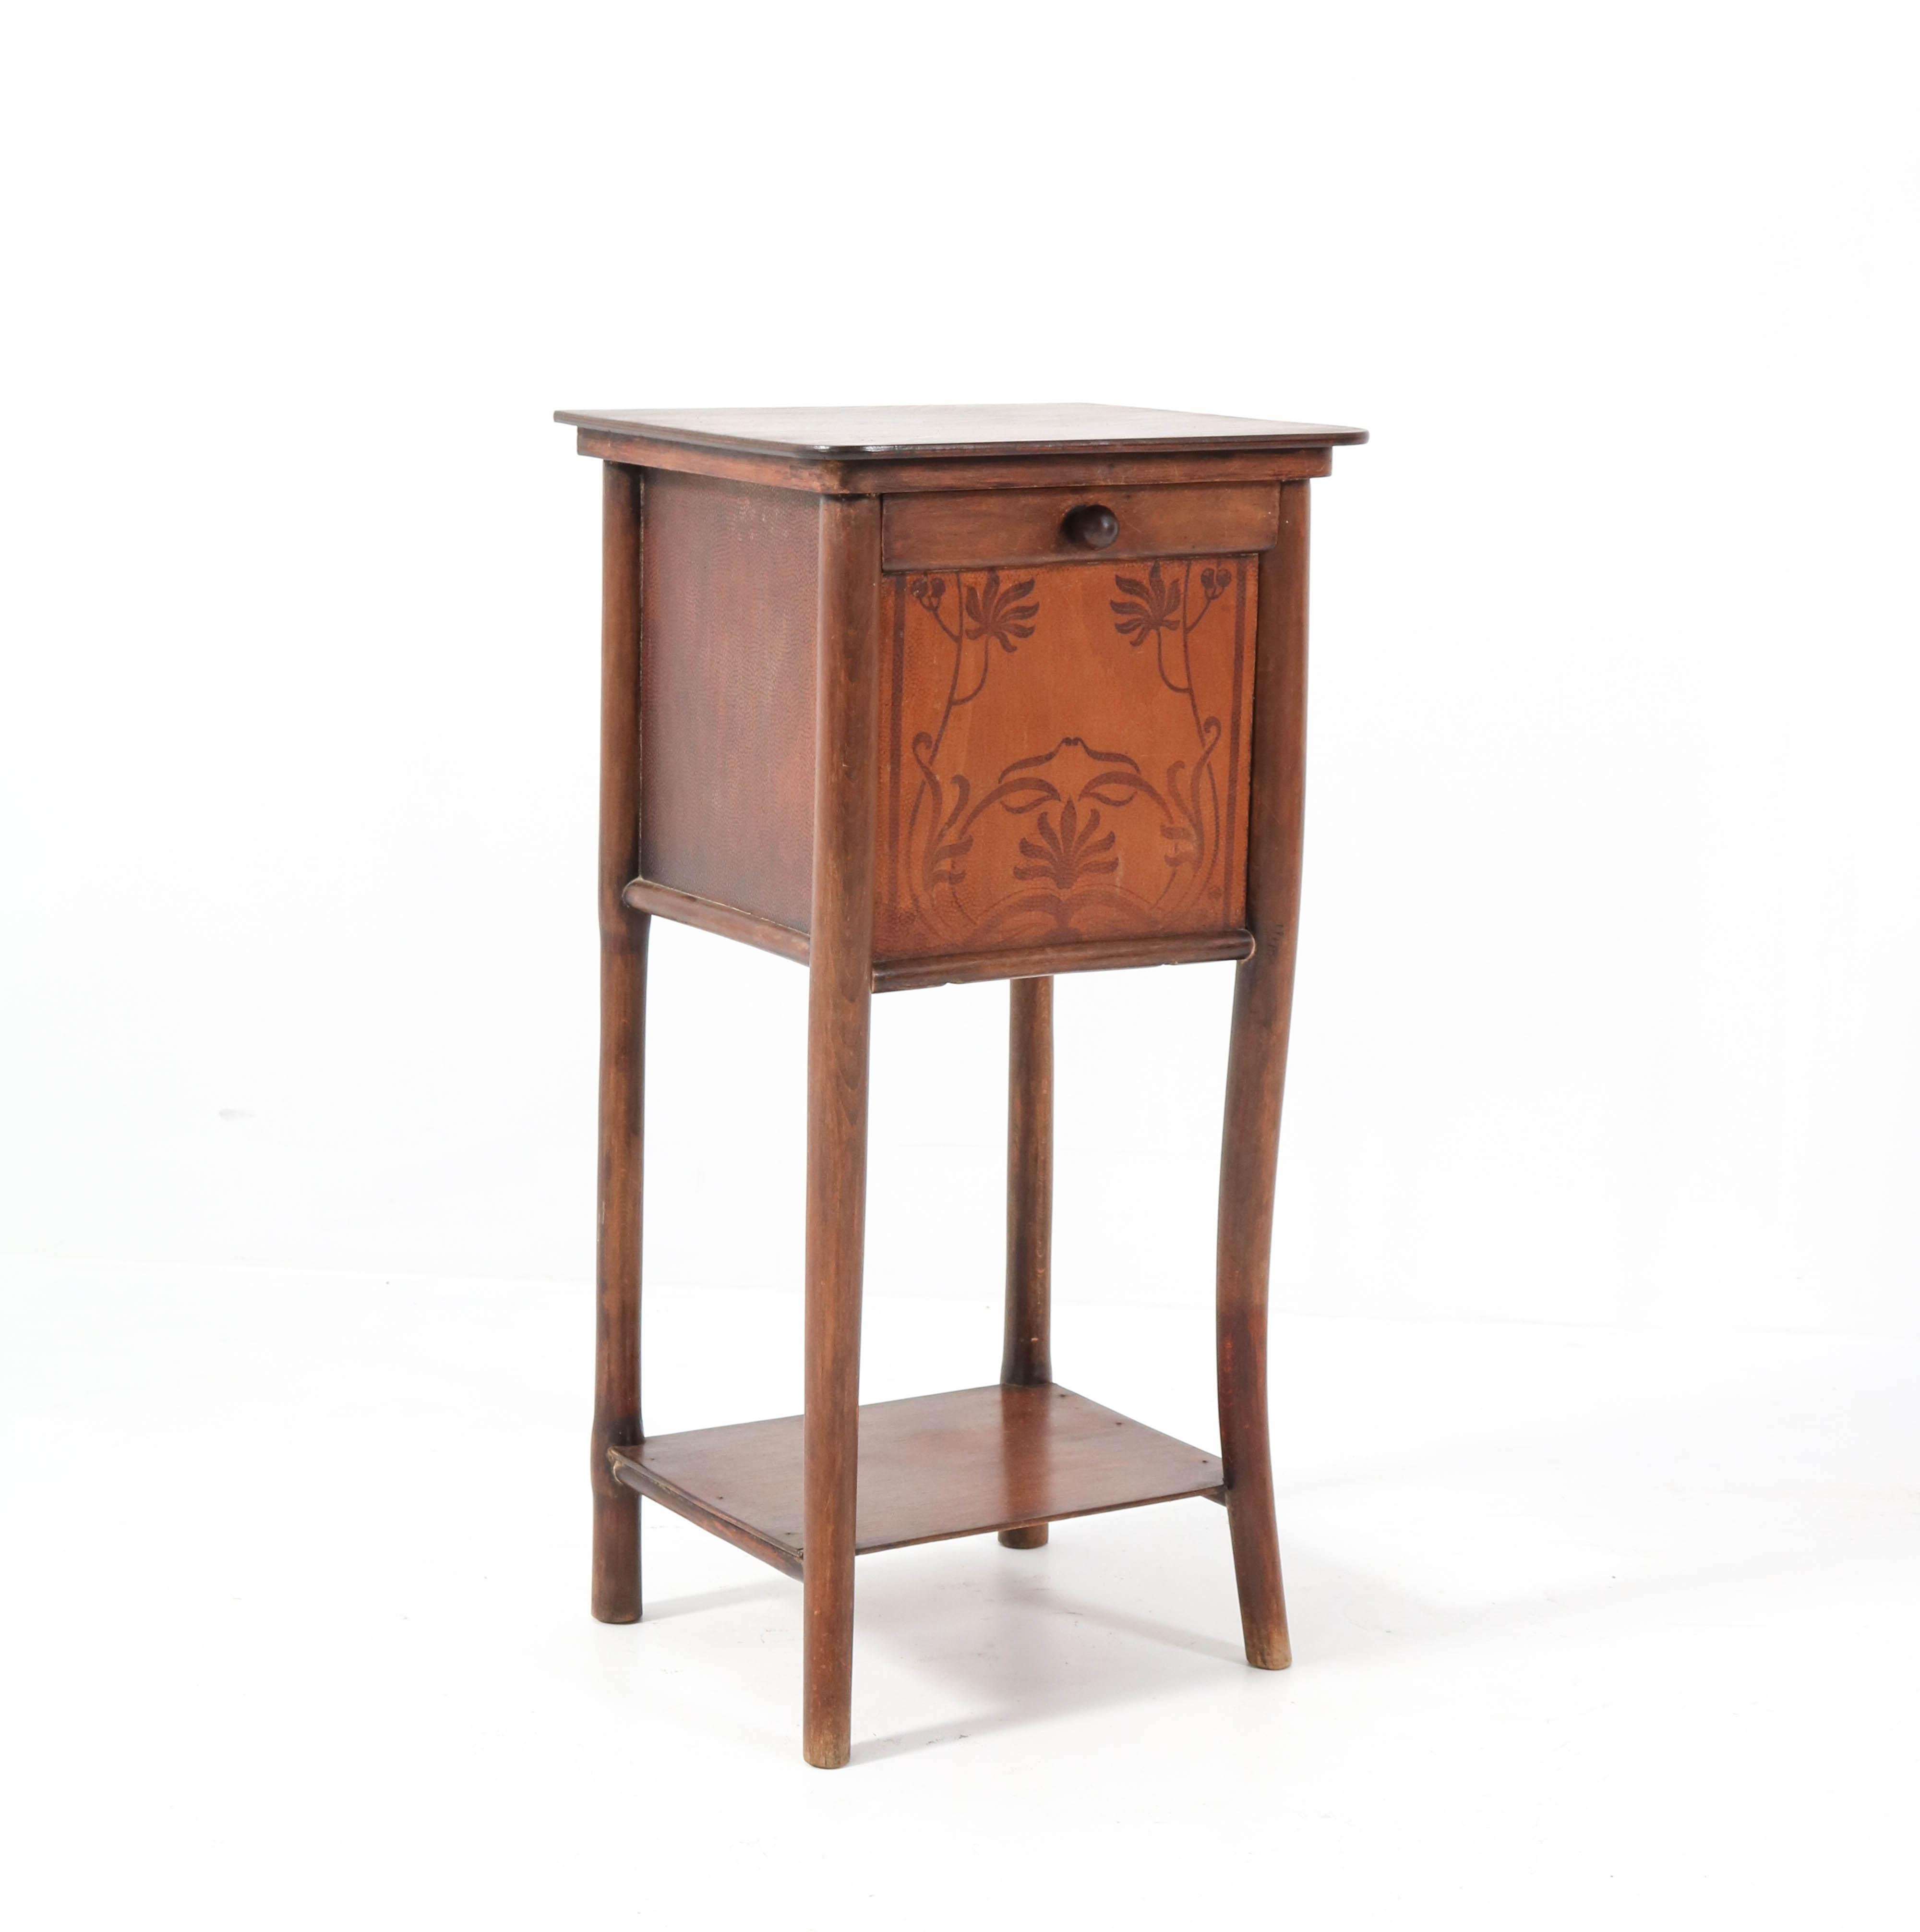 Stunning Art Nouveau nightstand.
Design by Jacob & Josef Kohn Vienna.
Beech bentwood frame.
Marked with original manufacturers label.
In good condition with minor wear consistent with age and use,
preserving a beautiful patina.
    